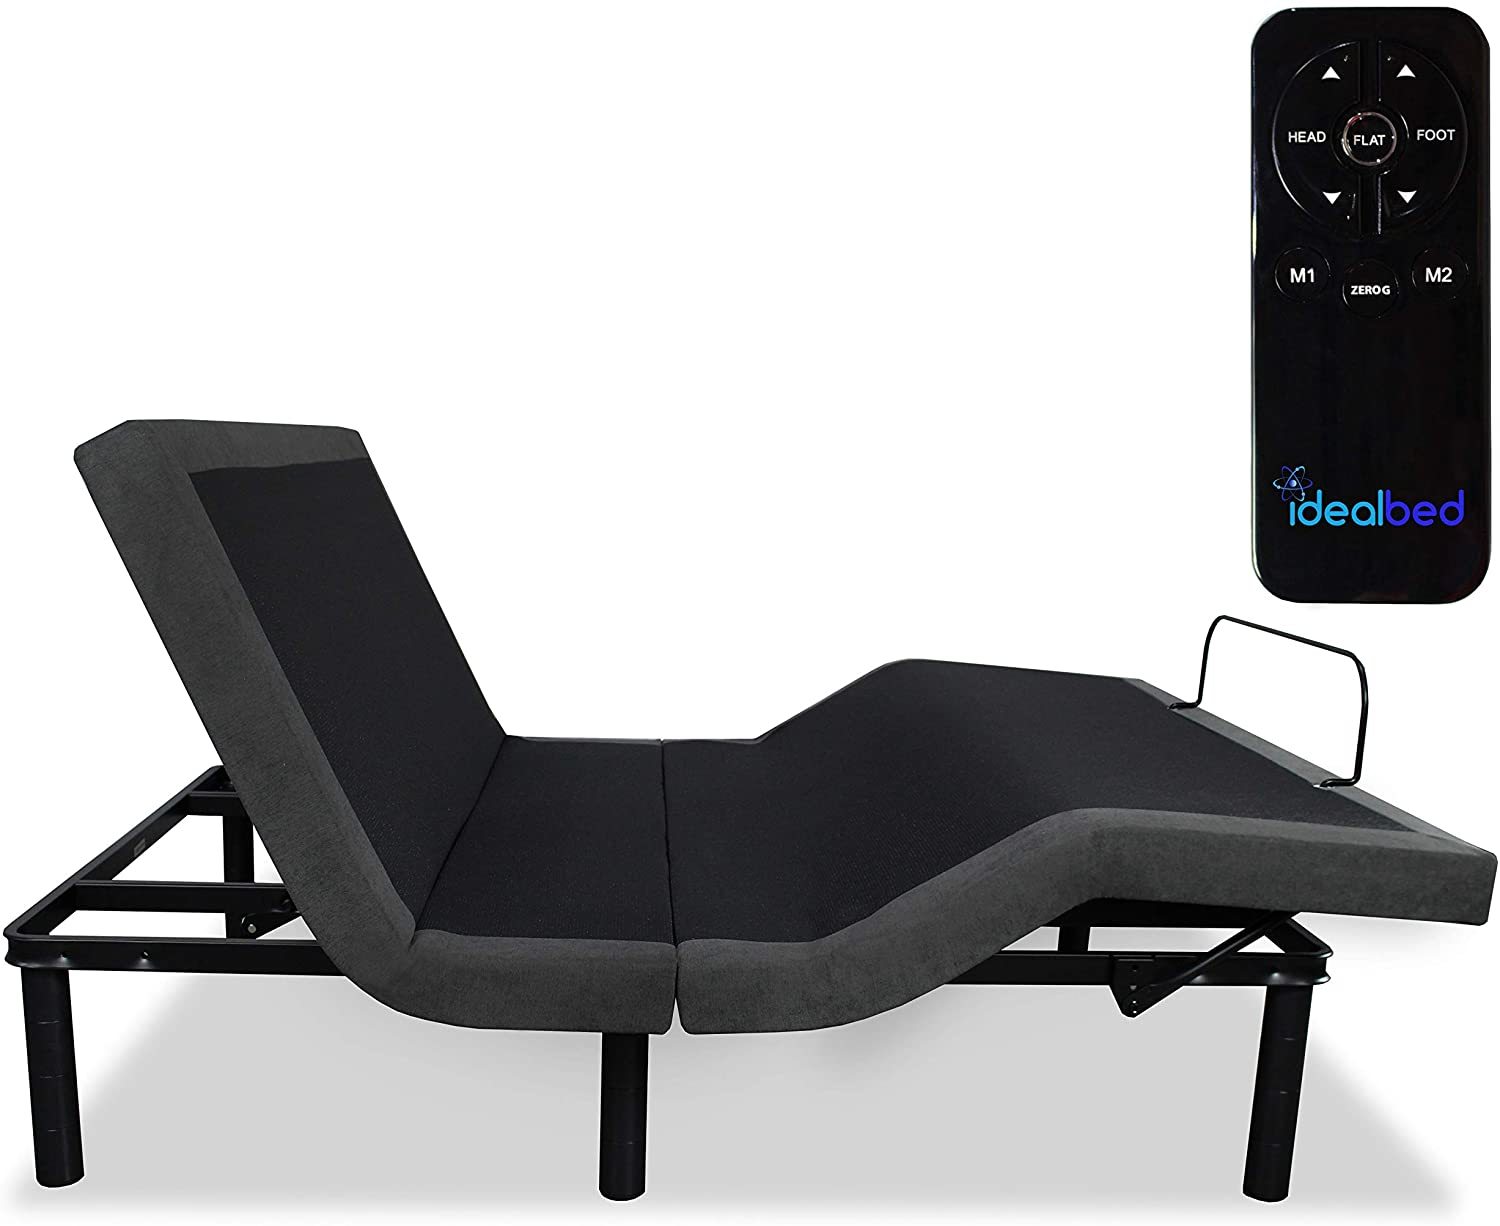 iDealBed 3i - Best Adjustable Beds for Back Pain